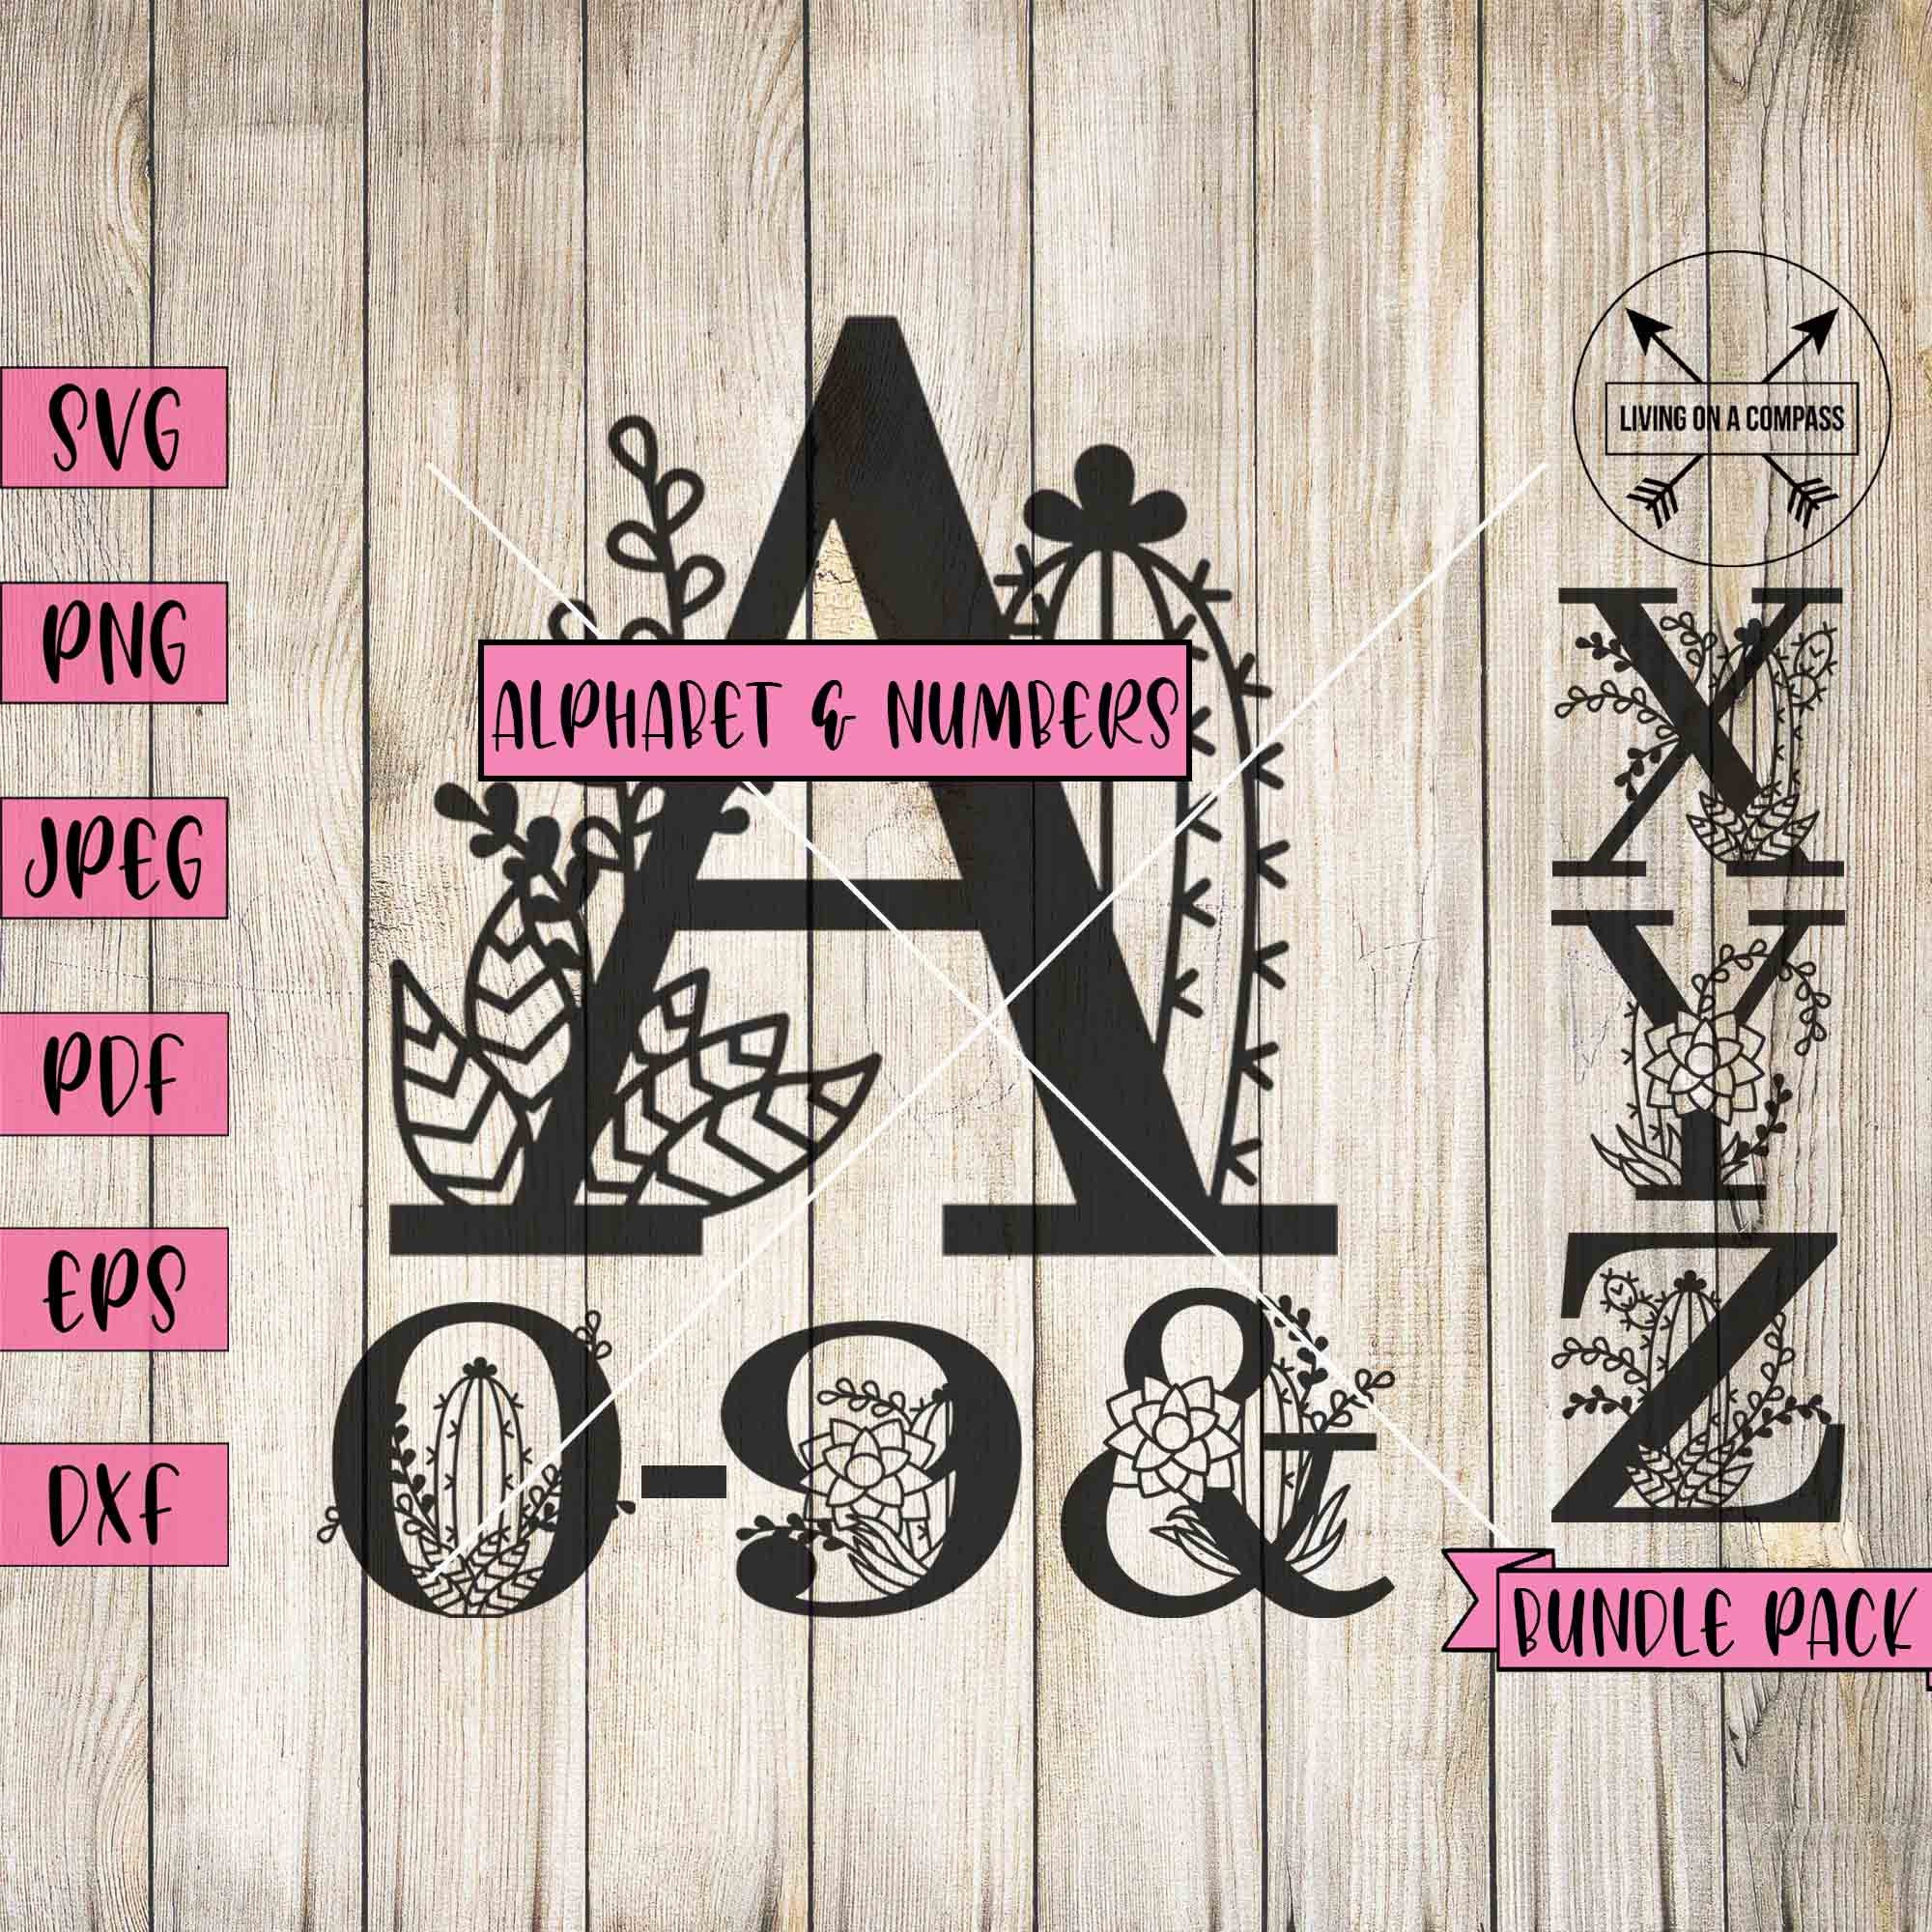 Alphabet Stencils Font N.10 Uppercase, Calligraphy Font Stencil, Individual  Letters A to Z, Single Letter, Stencils for Painting on Wood 